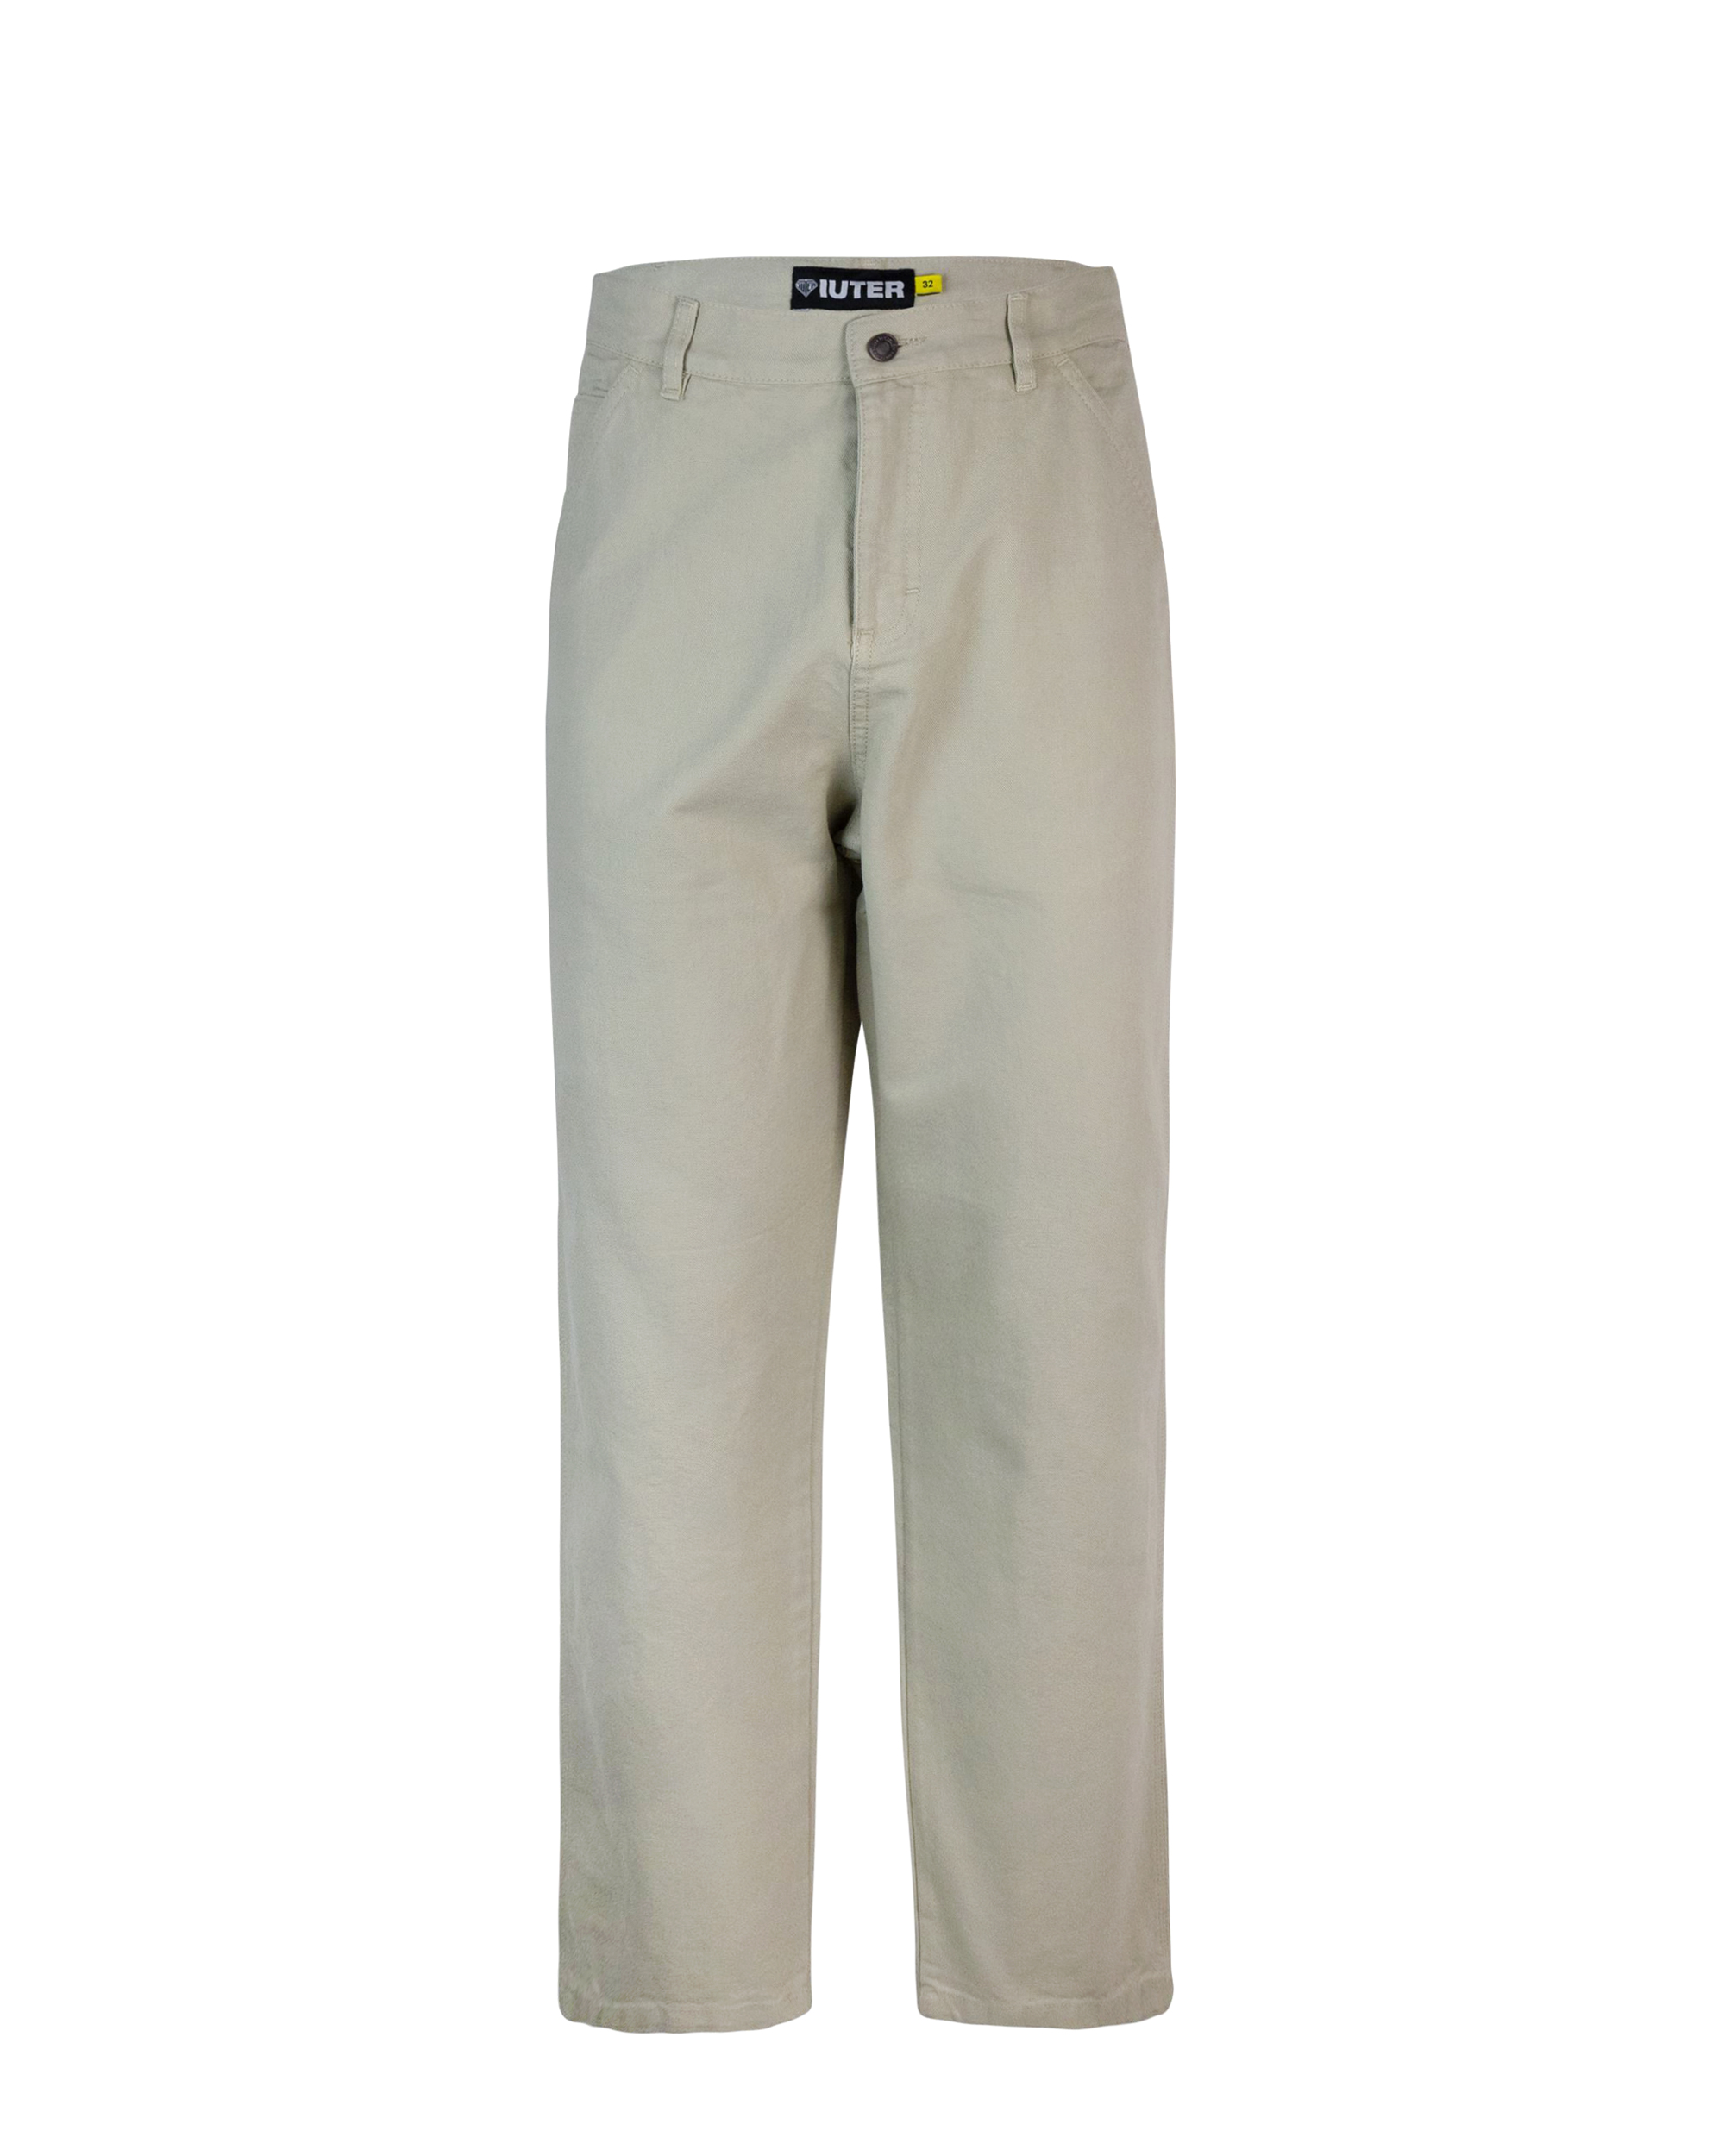 Shop Iuter Work Ice Trousers